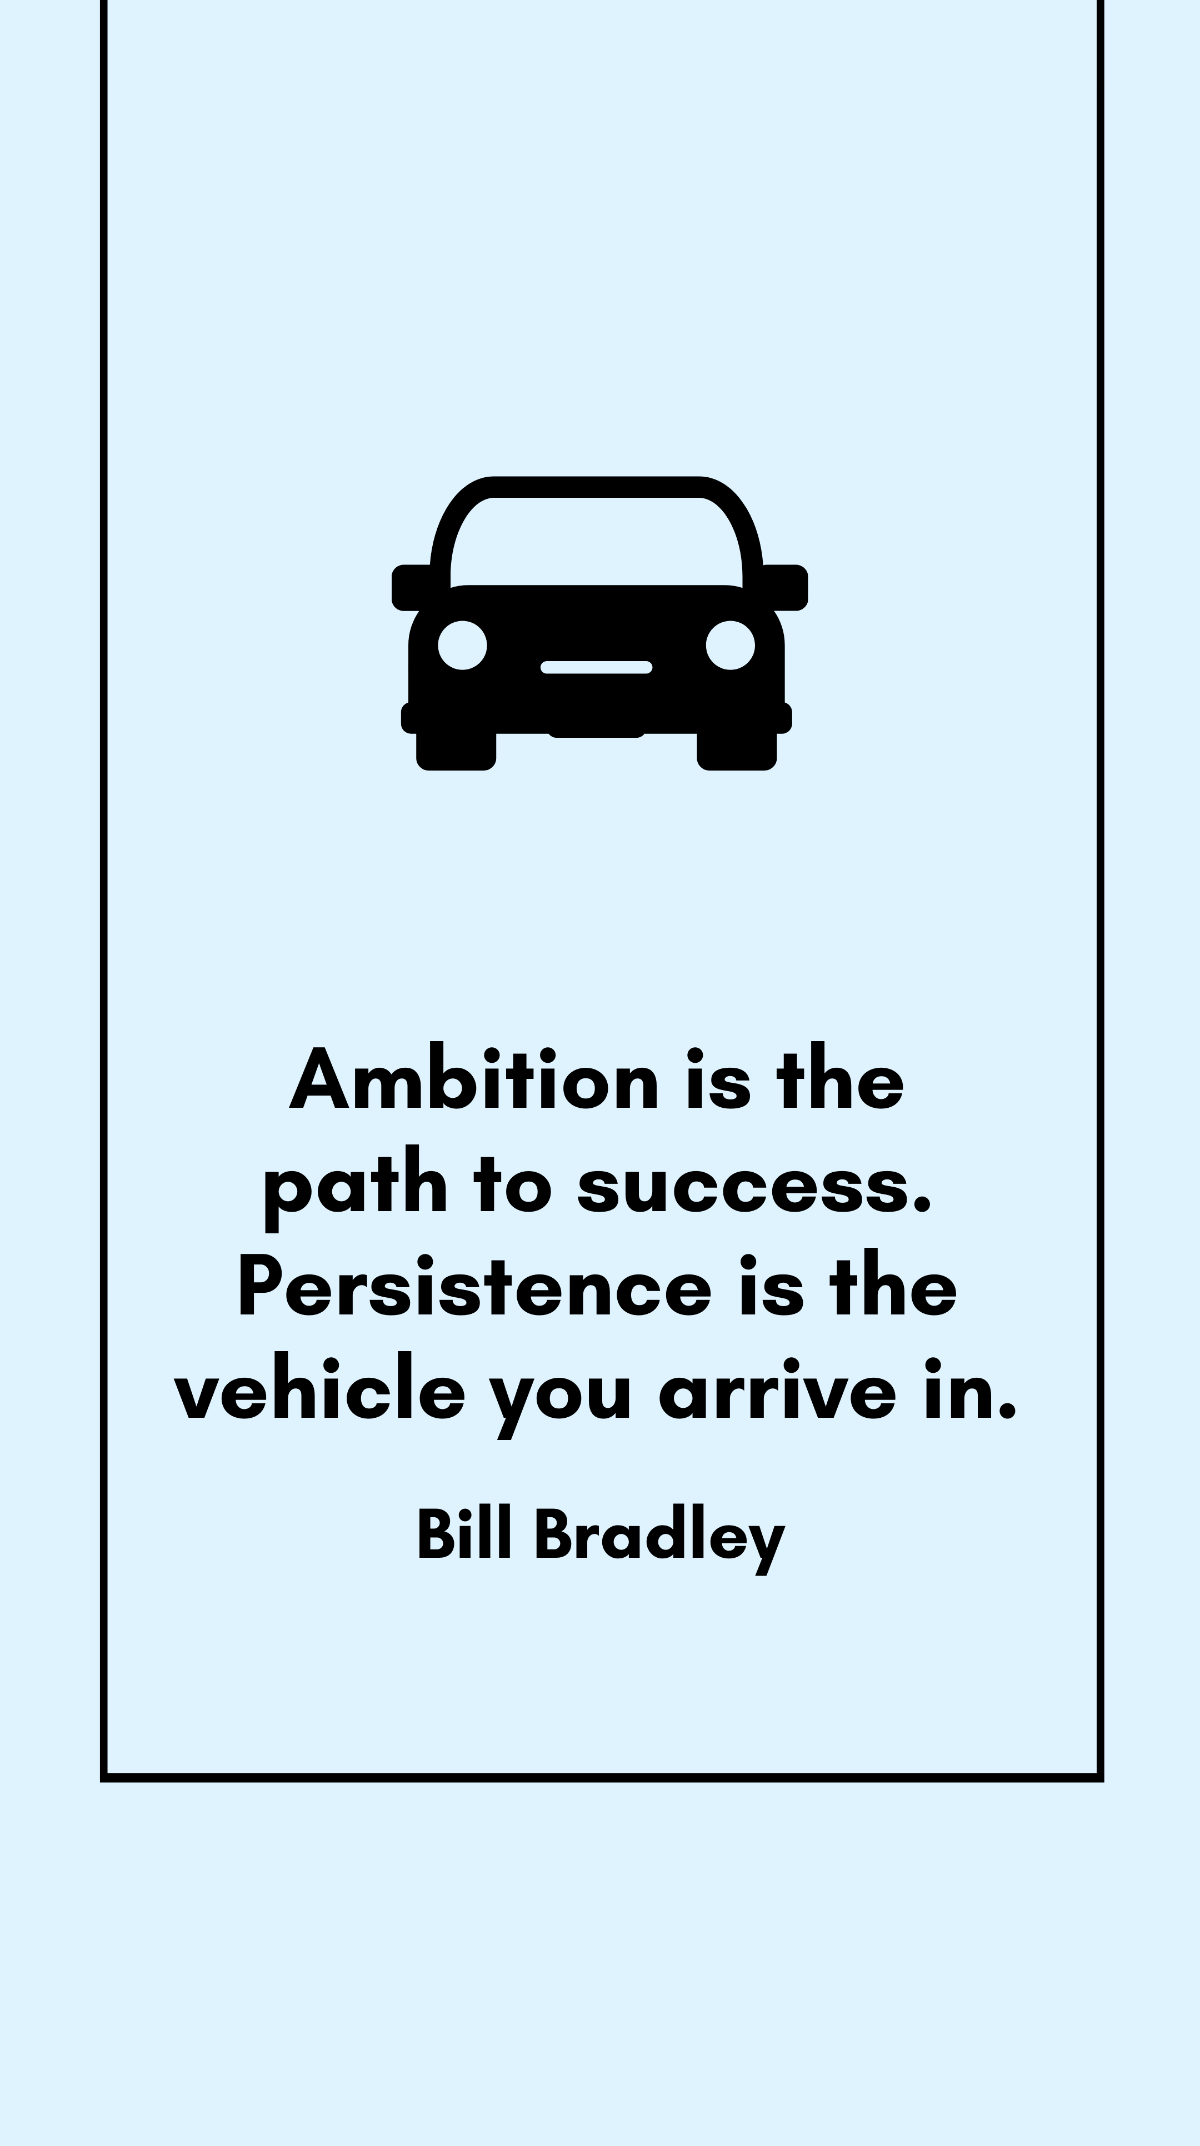 Free Bill Bradley - Ambition is the path to success. Persistence is the vehicle you arrive in. Template